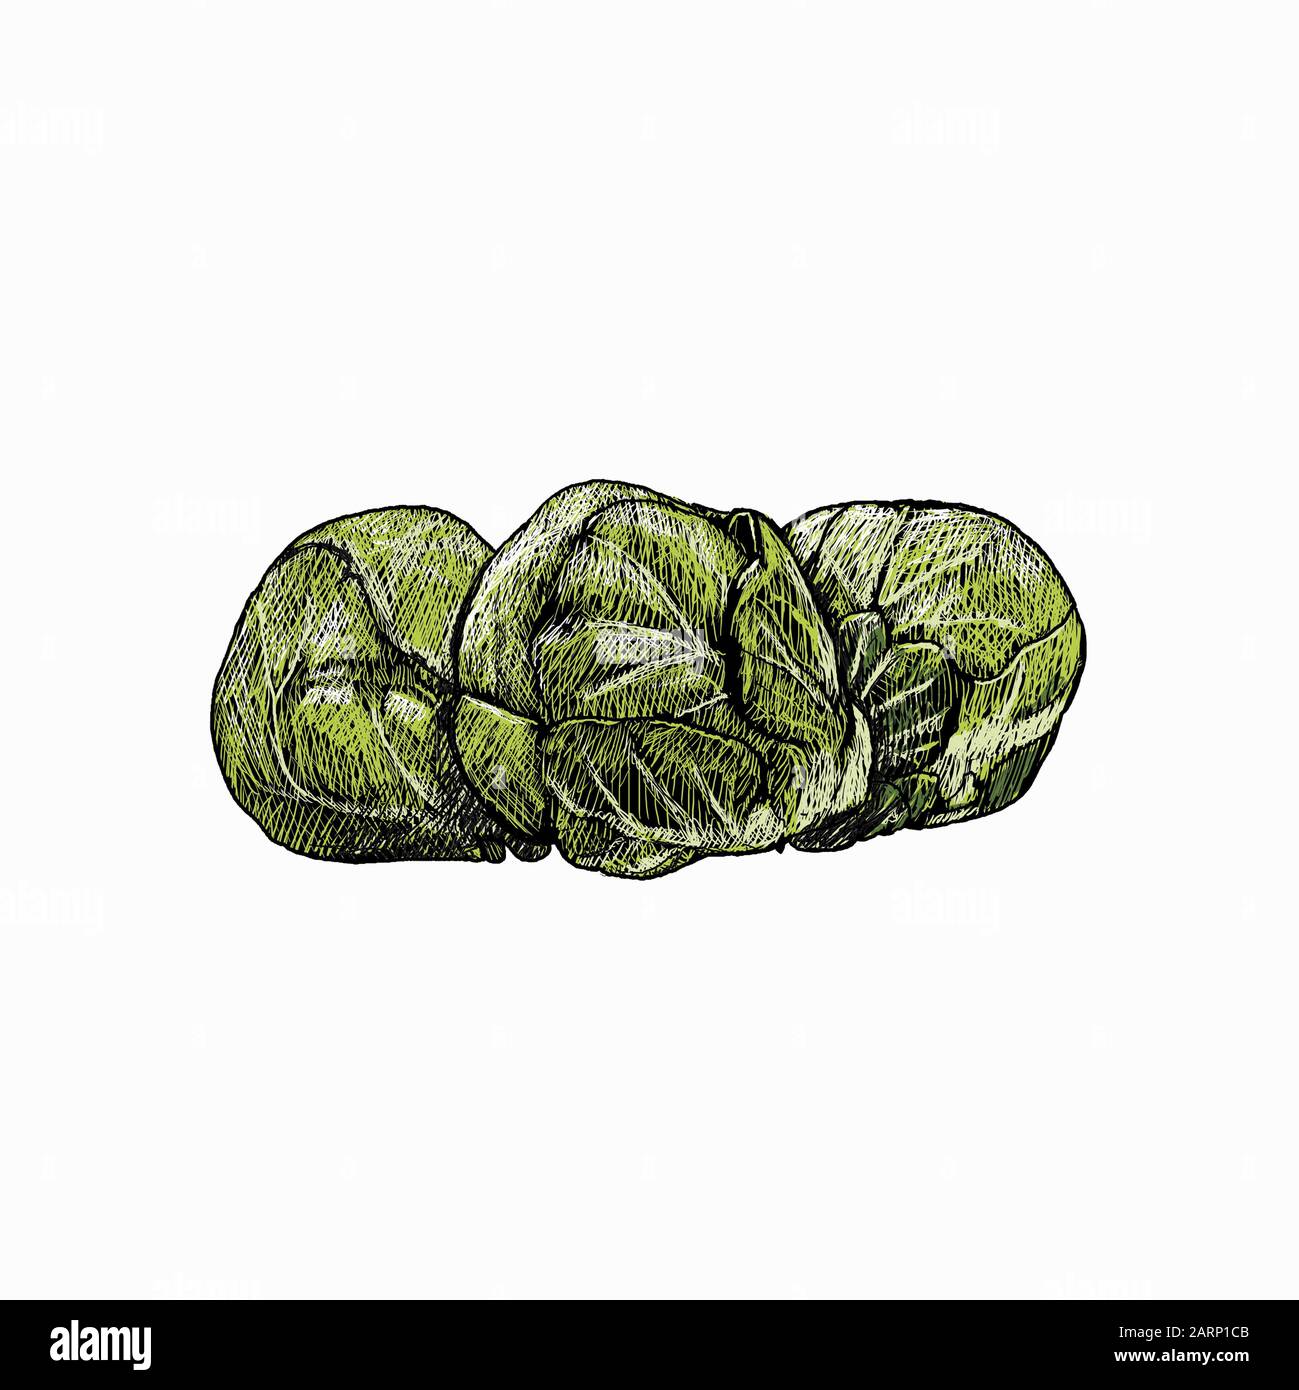 Illustration of brussels sprouts Stock Photo